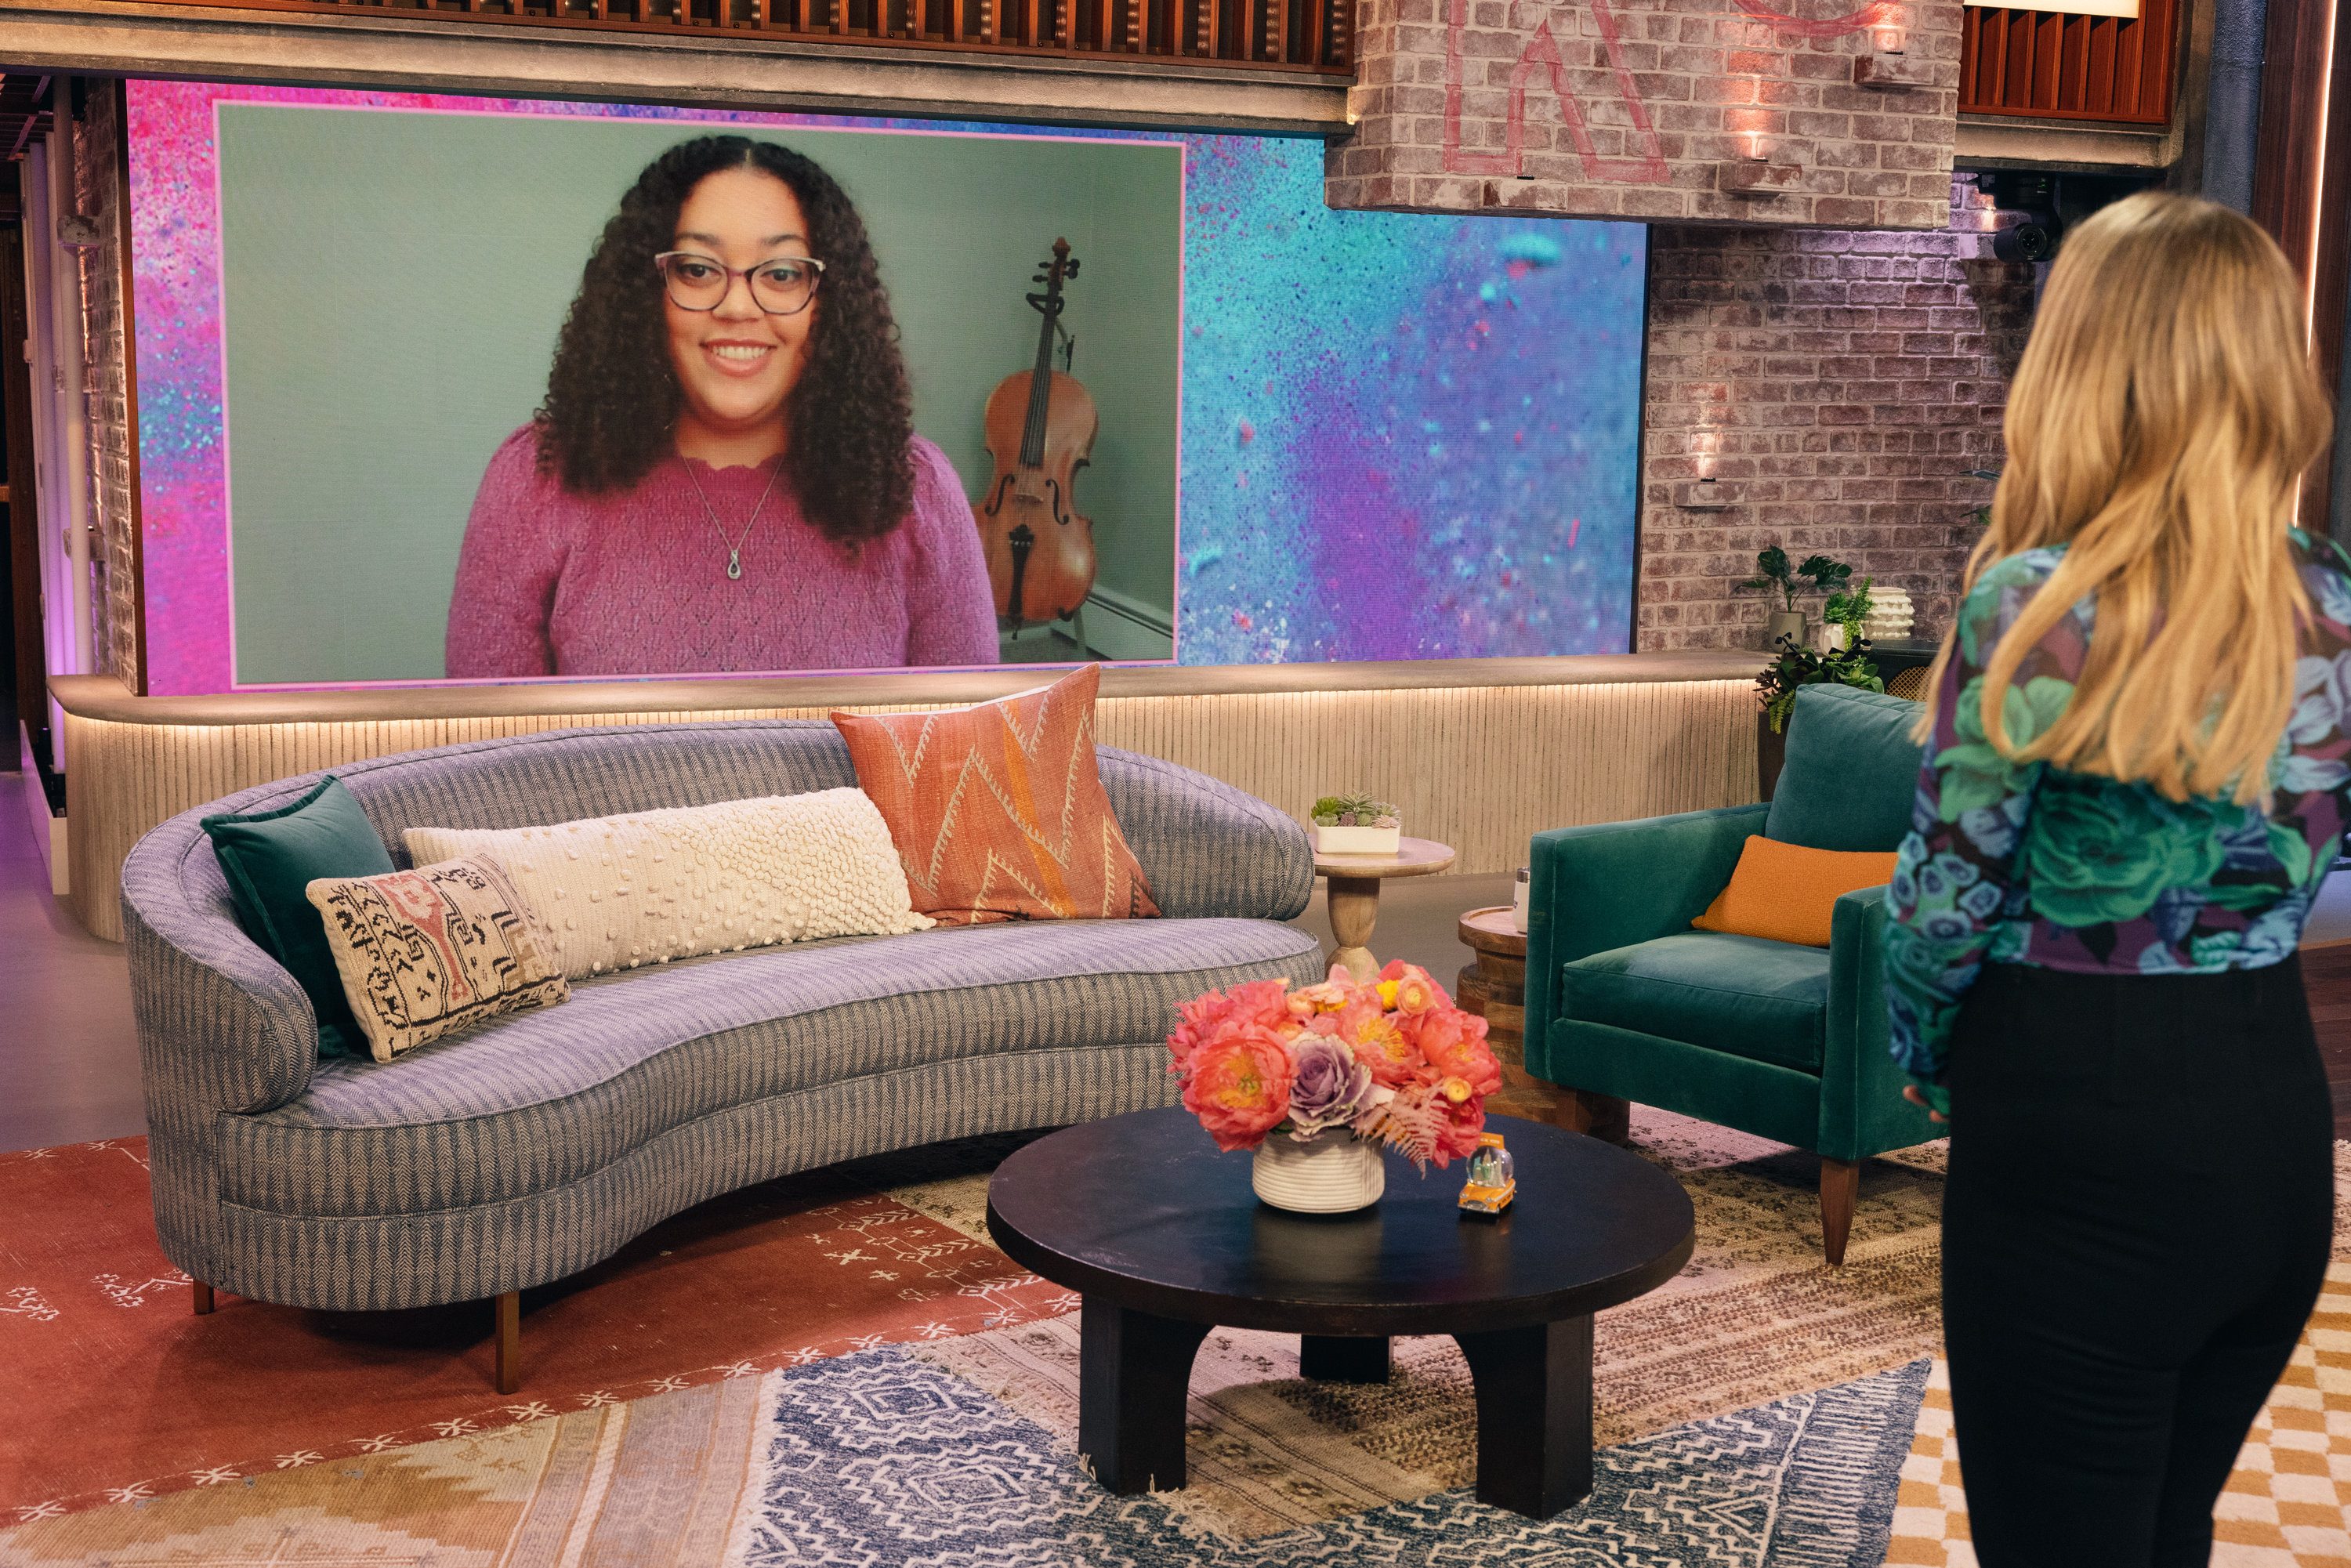 Lynnea Jackson appears on a large screen on the set of The Kelly Clarkston Show